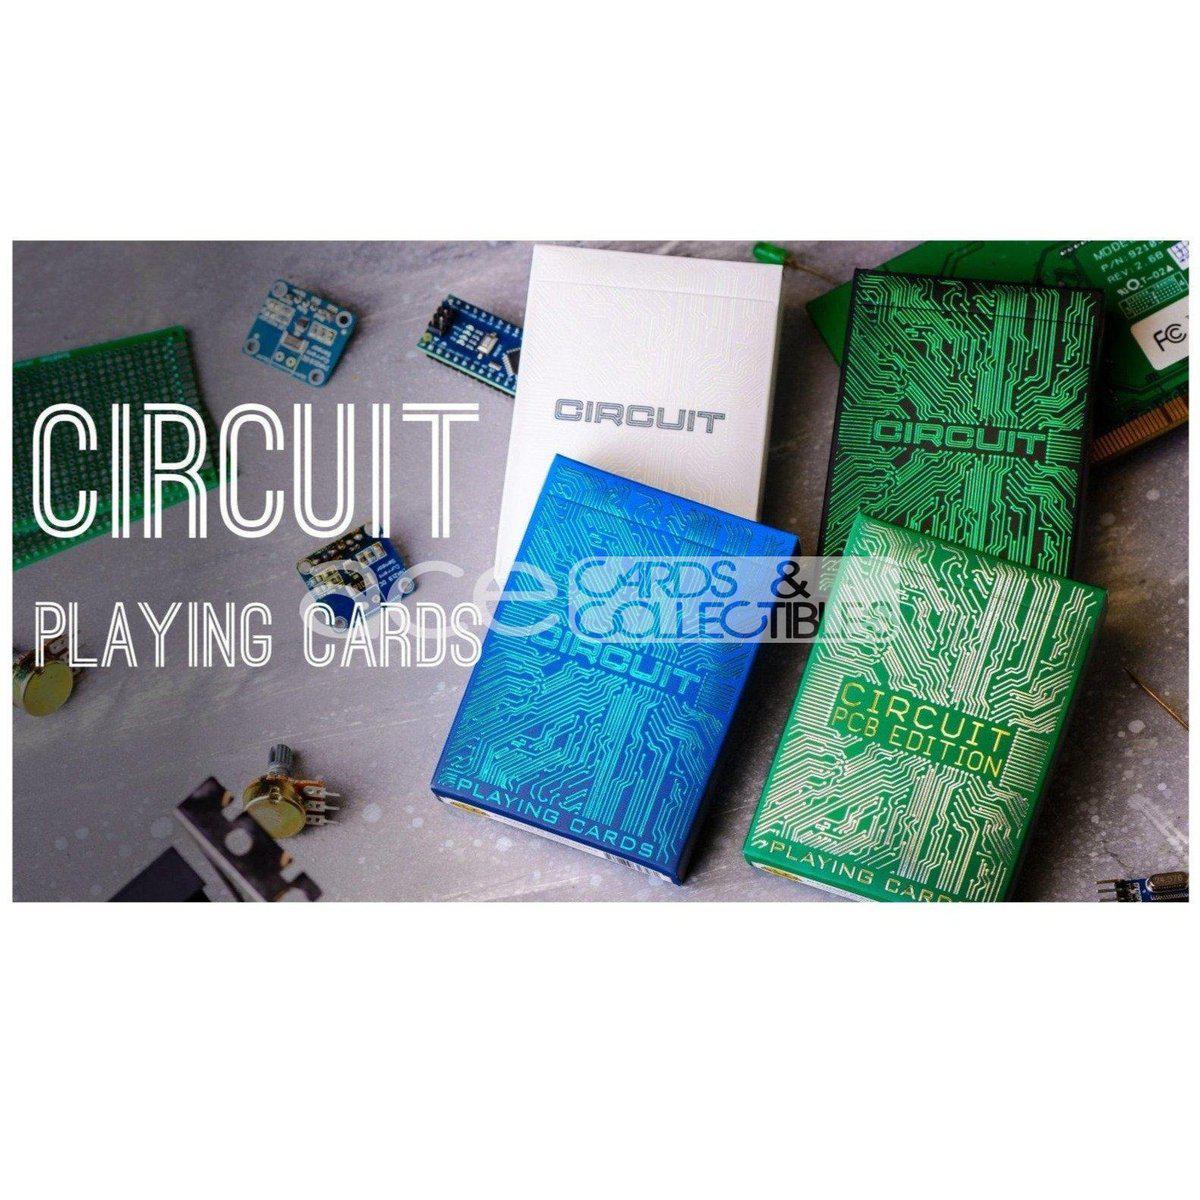 Circuit Playing Cards By Elephant-Blue-United States Playing Cards Company-Ace Cards & Collectibles